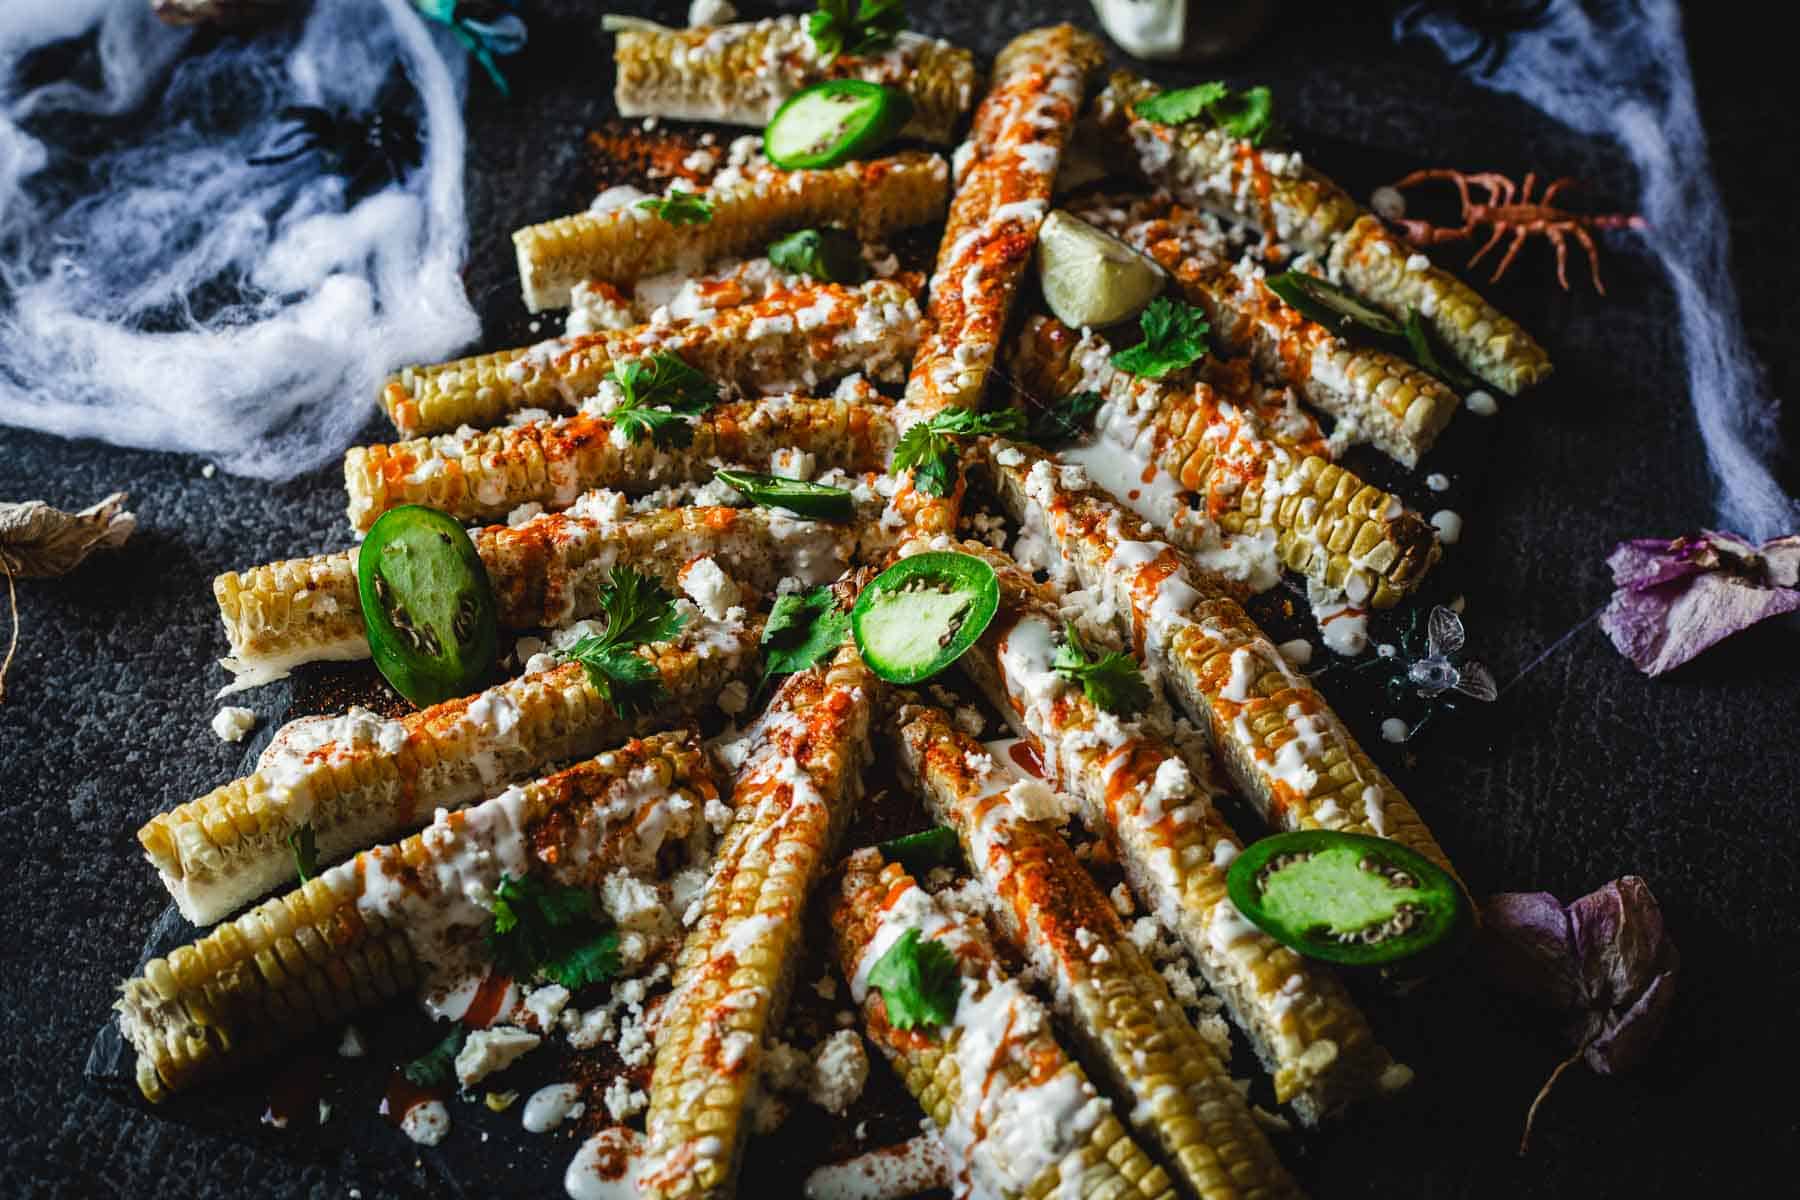 Corn on the cob with cojita cheese and jalapenos.